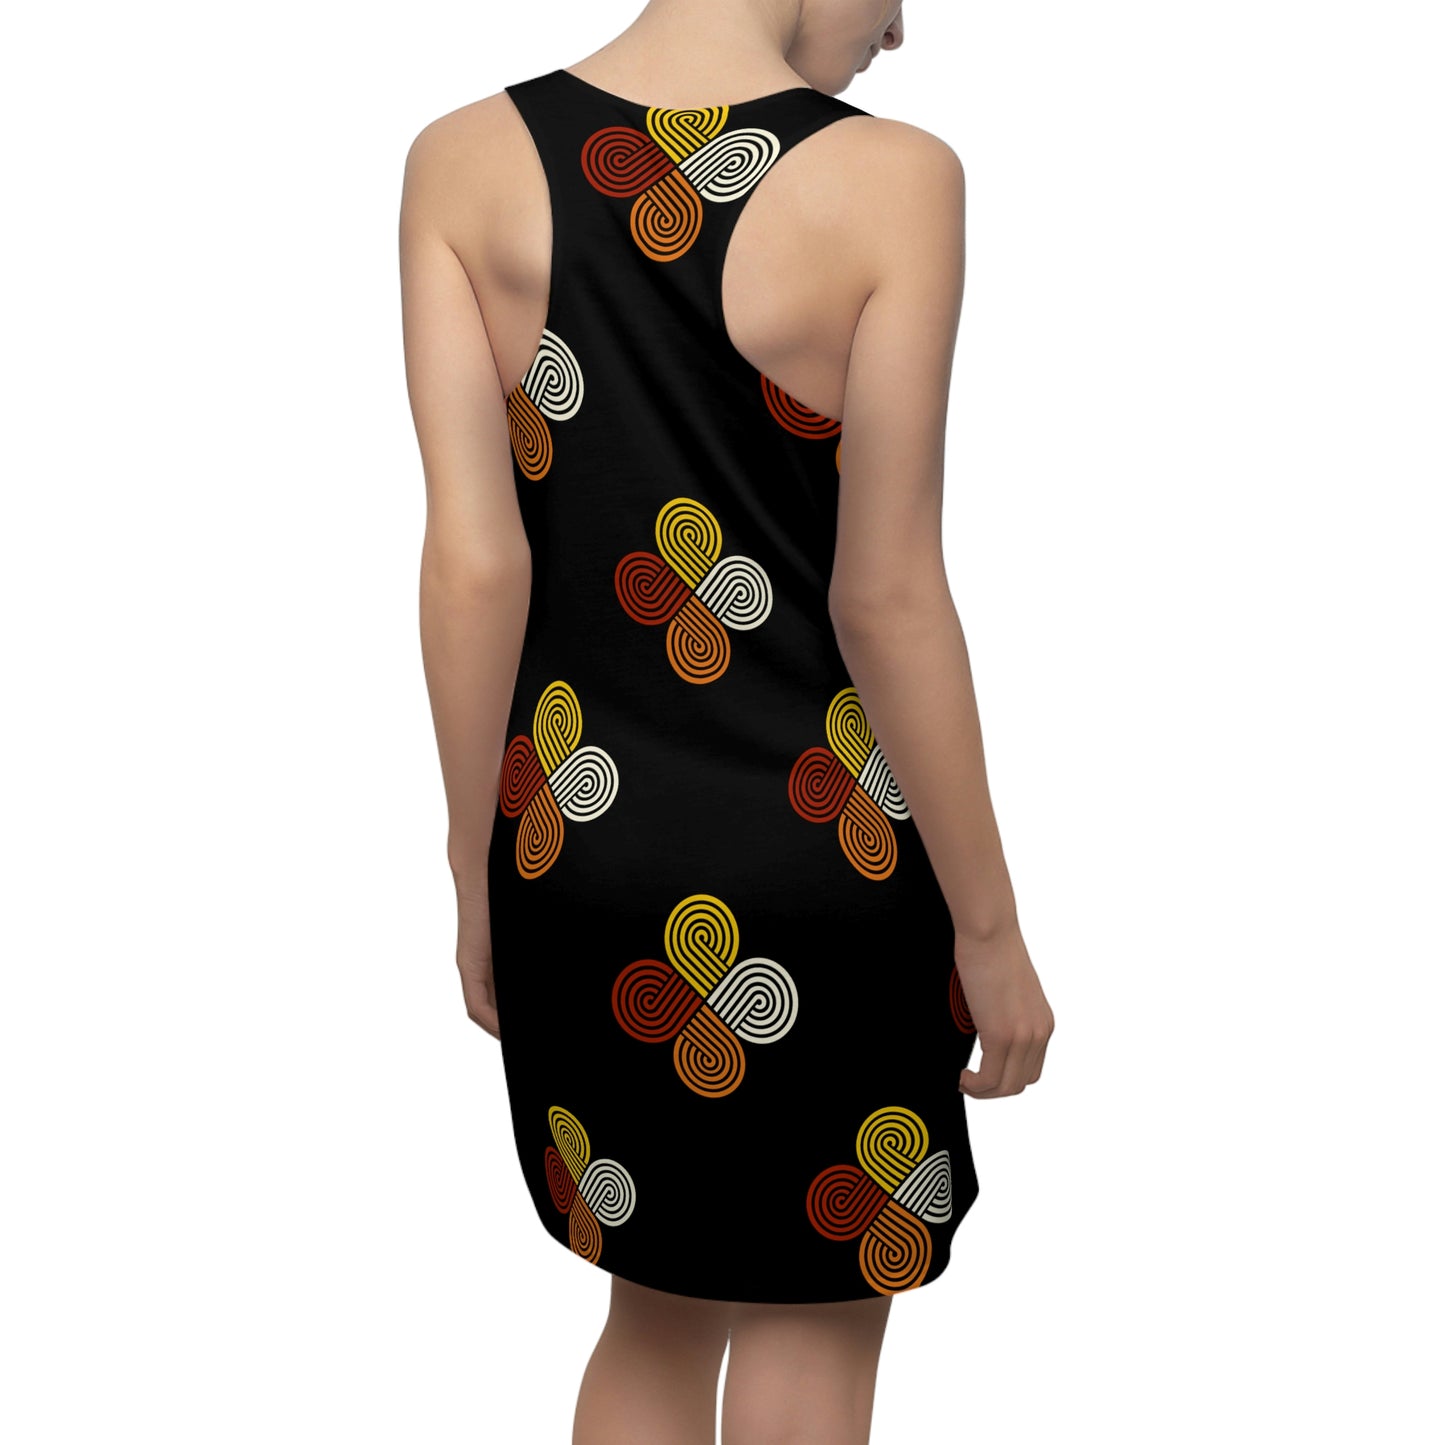 Fire in Four Directions Dress